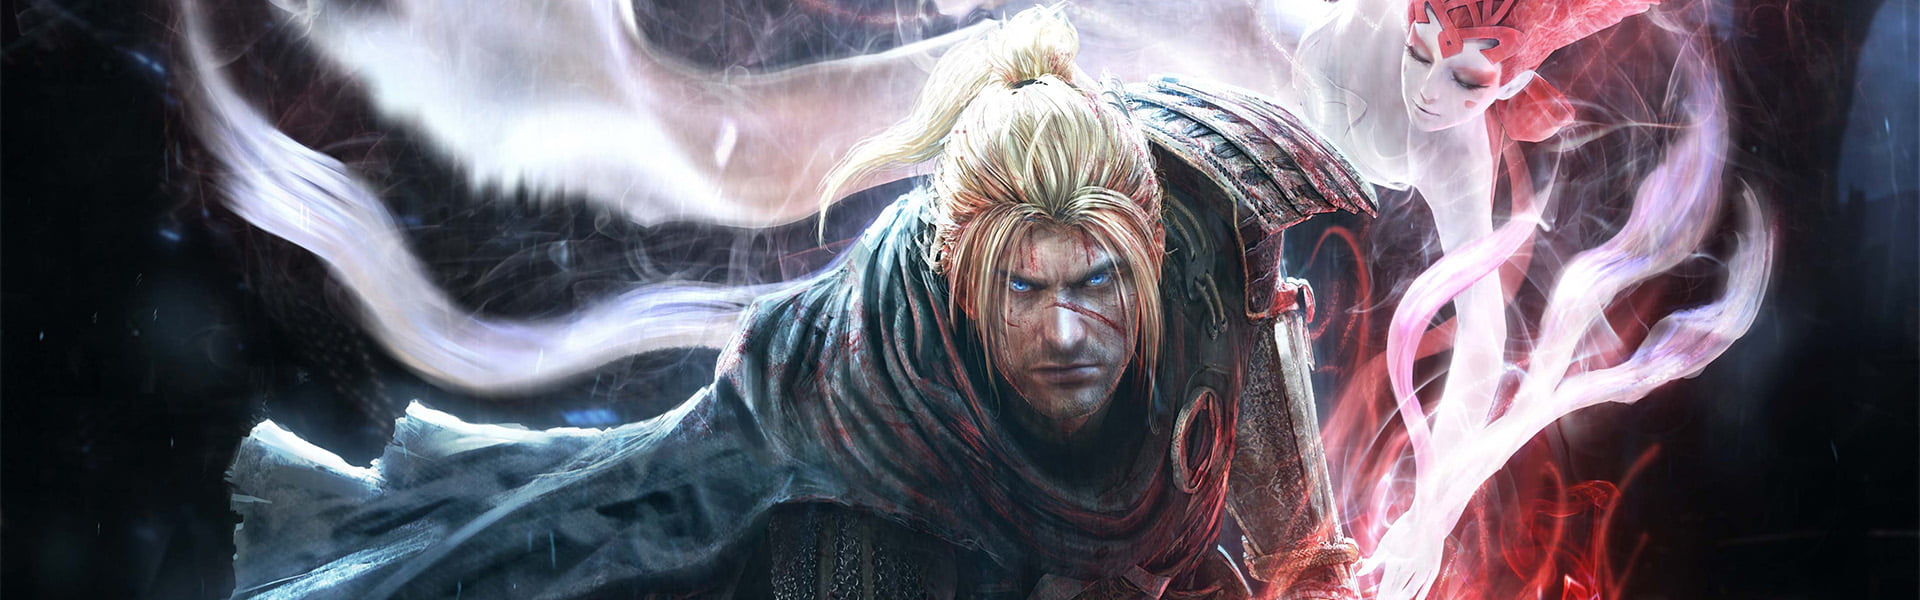 Nioh Review 12